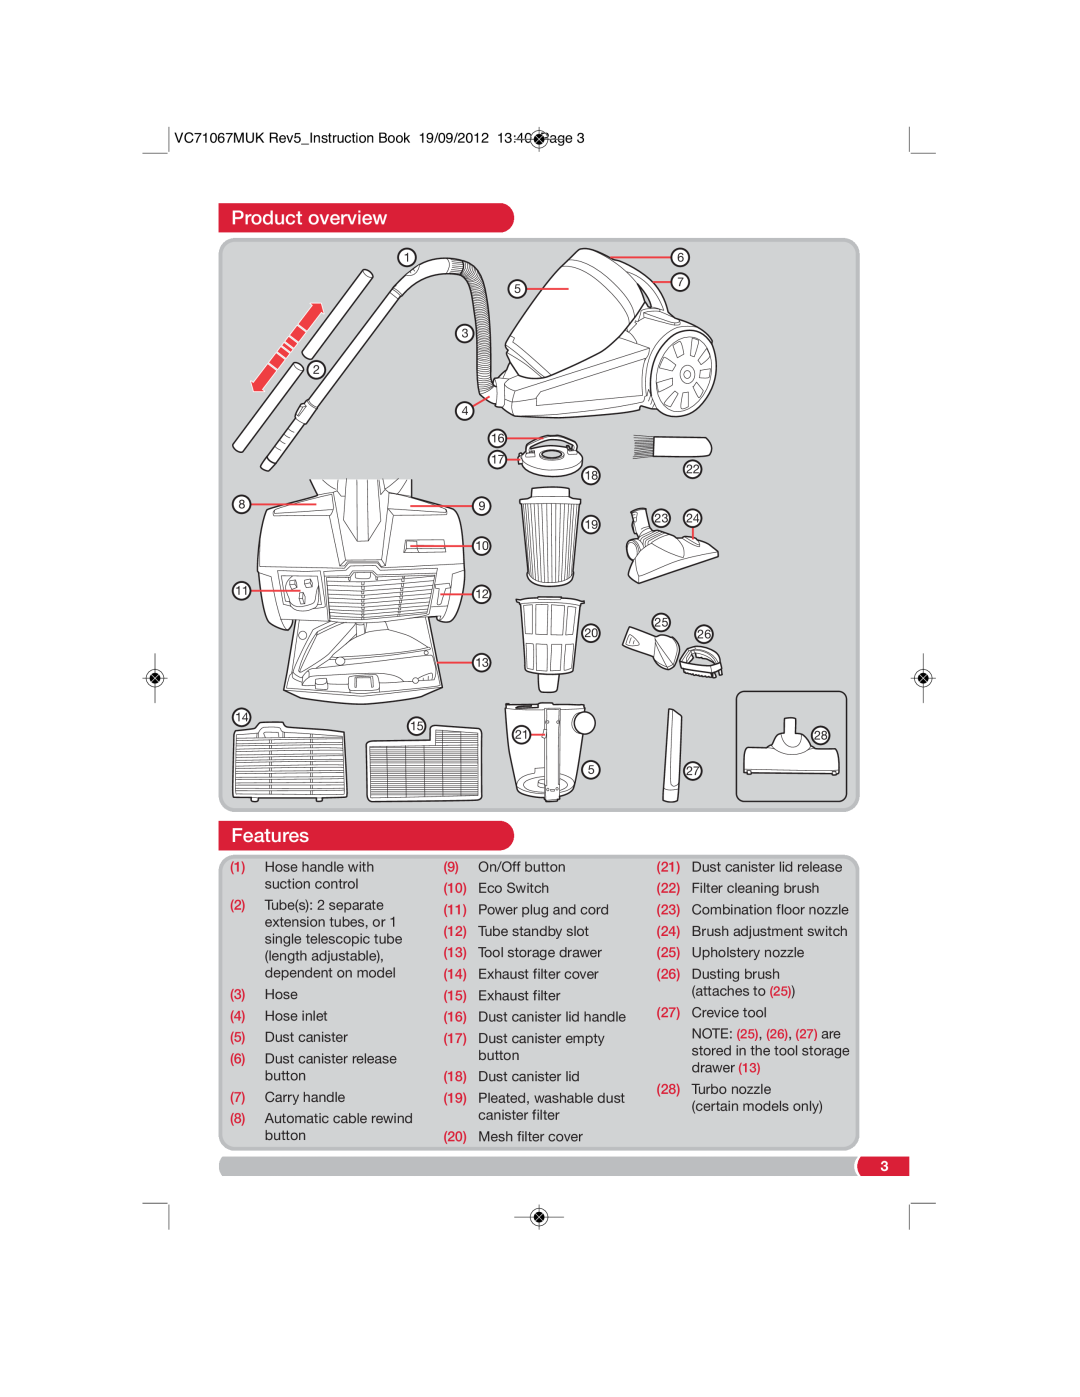 Morphy Richards VC71067 manual Product overview, Features 